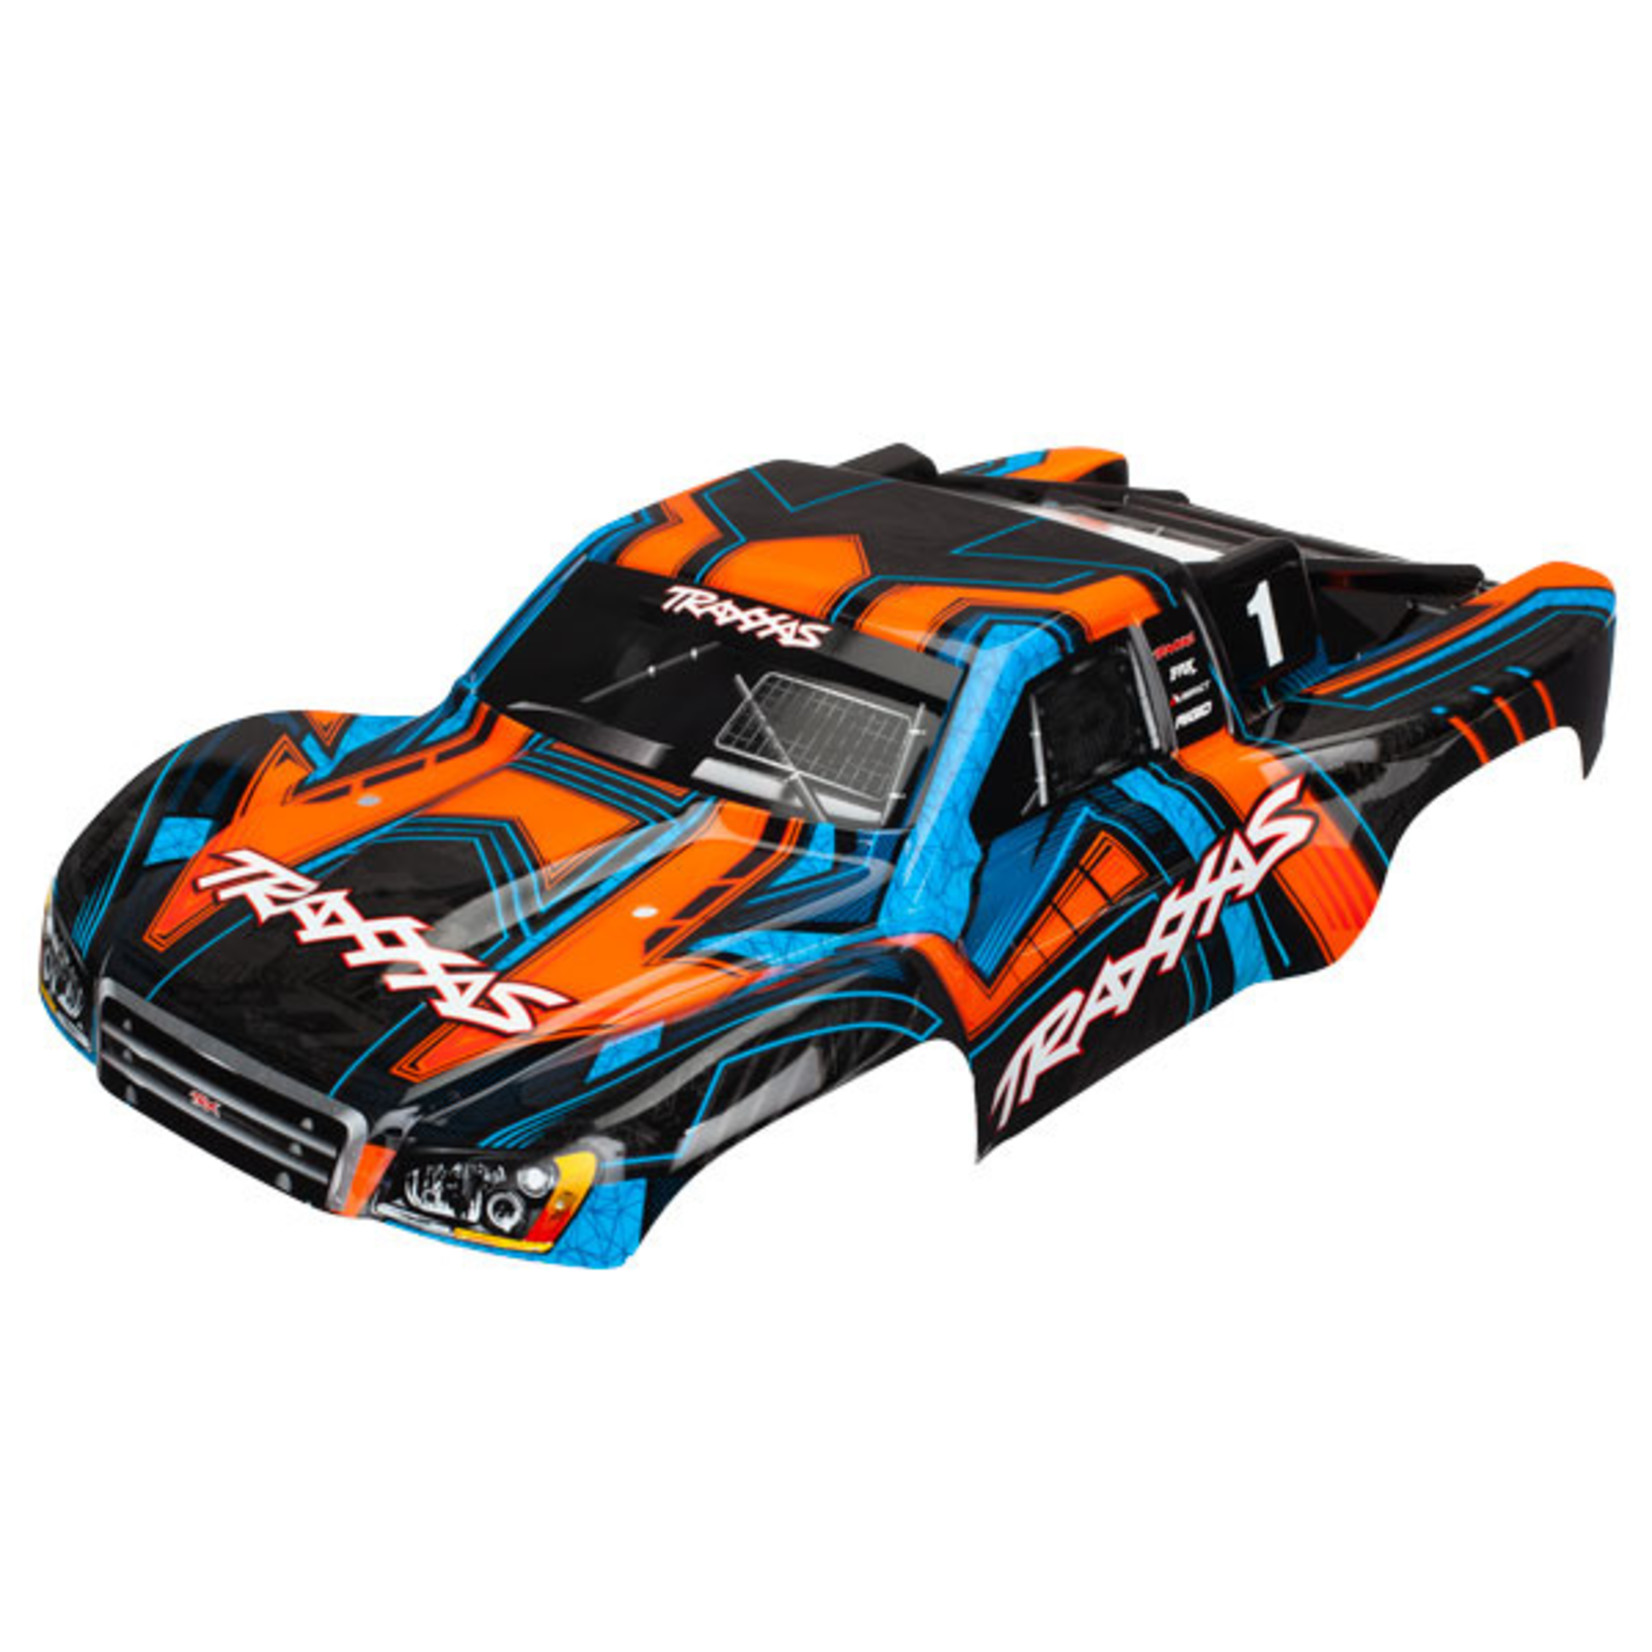 Traxxas 6844 - Body, Slash 4X4, orange and blue (painted, decal